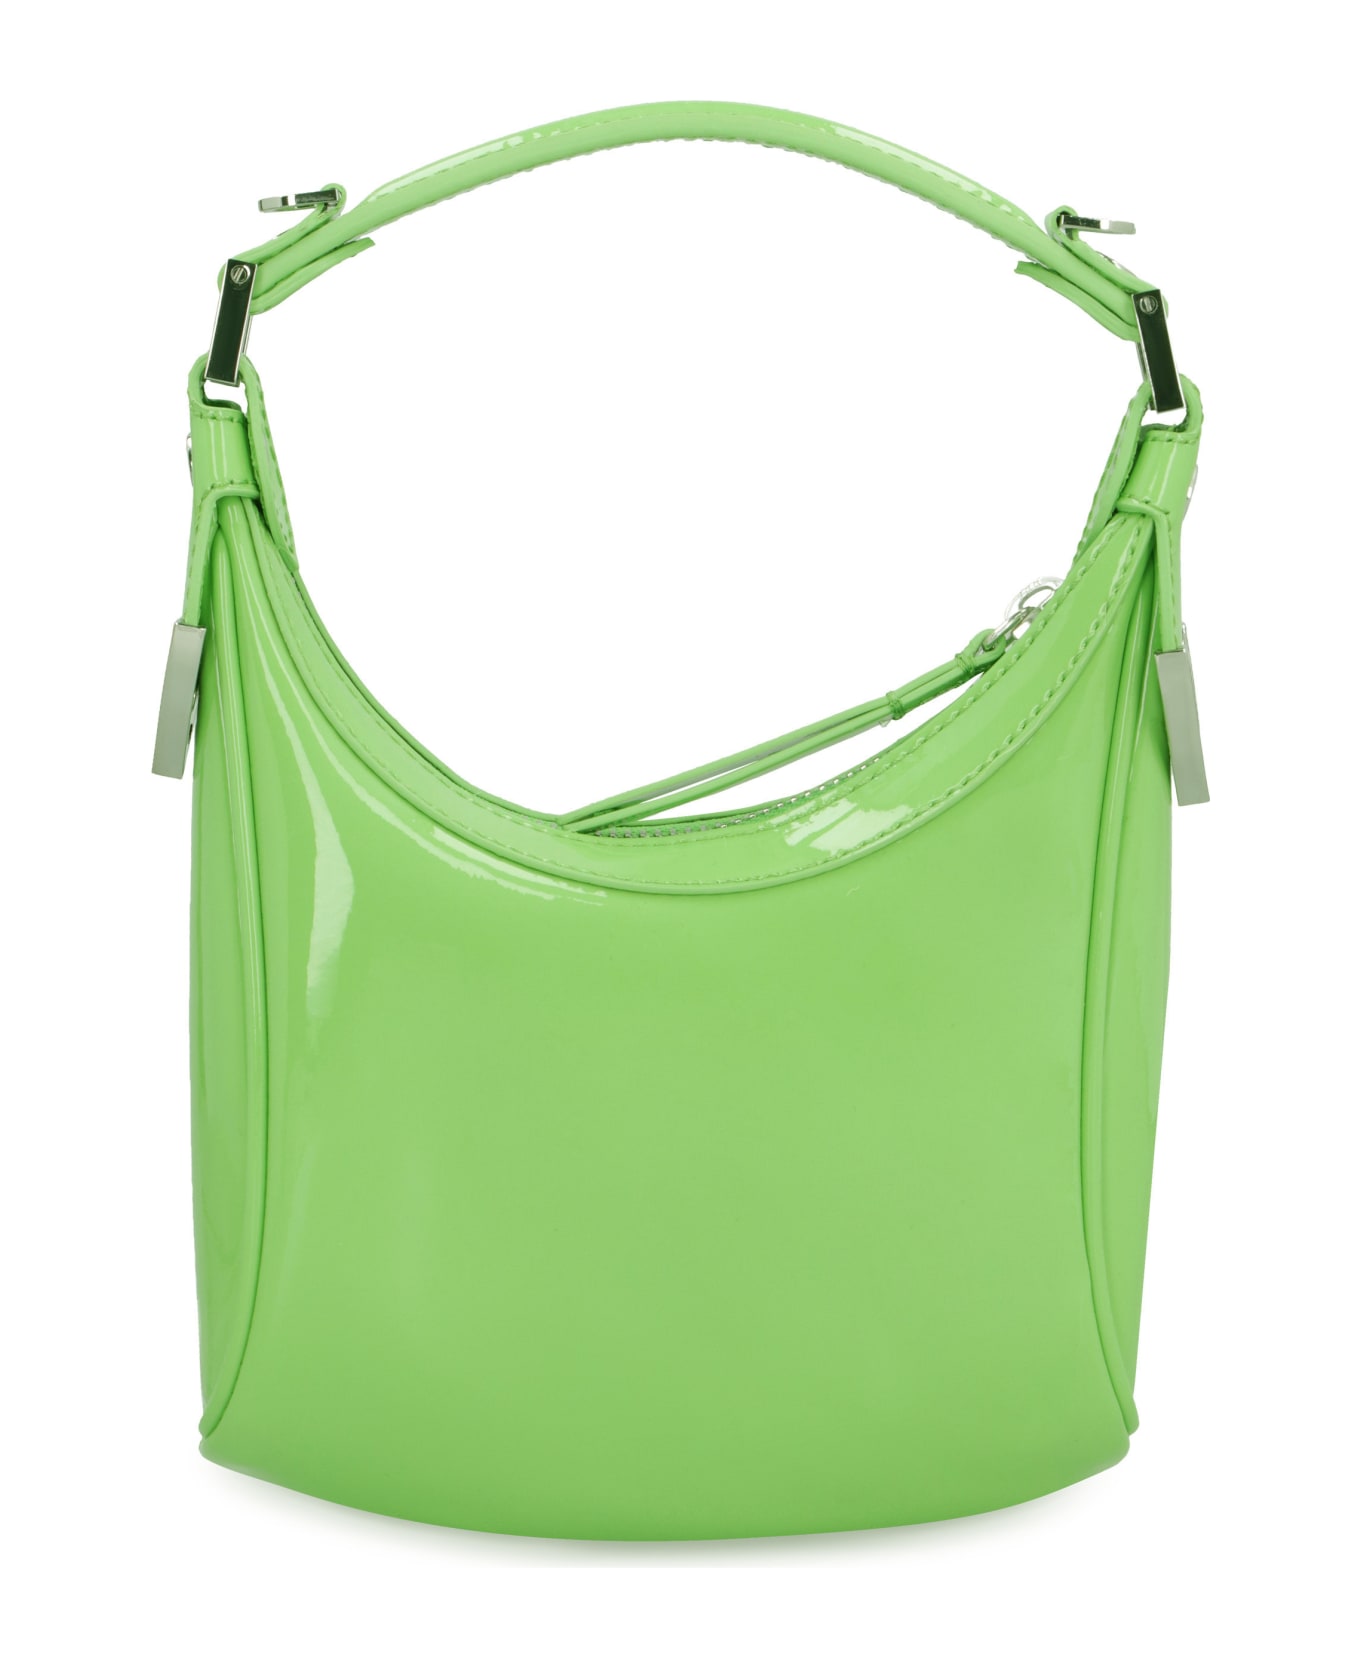 BY FAR Cosmo Leather Handbag - green トートバッグ